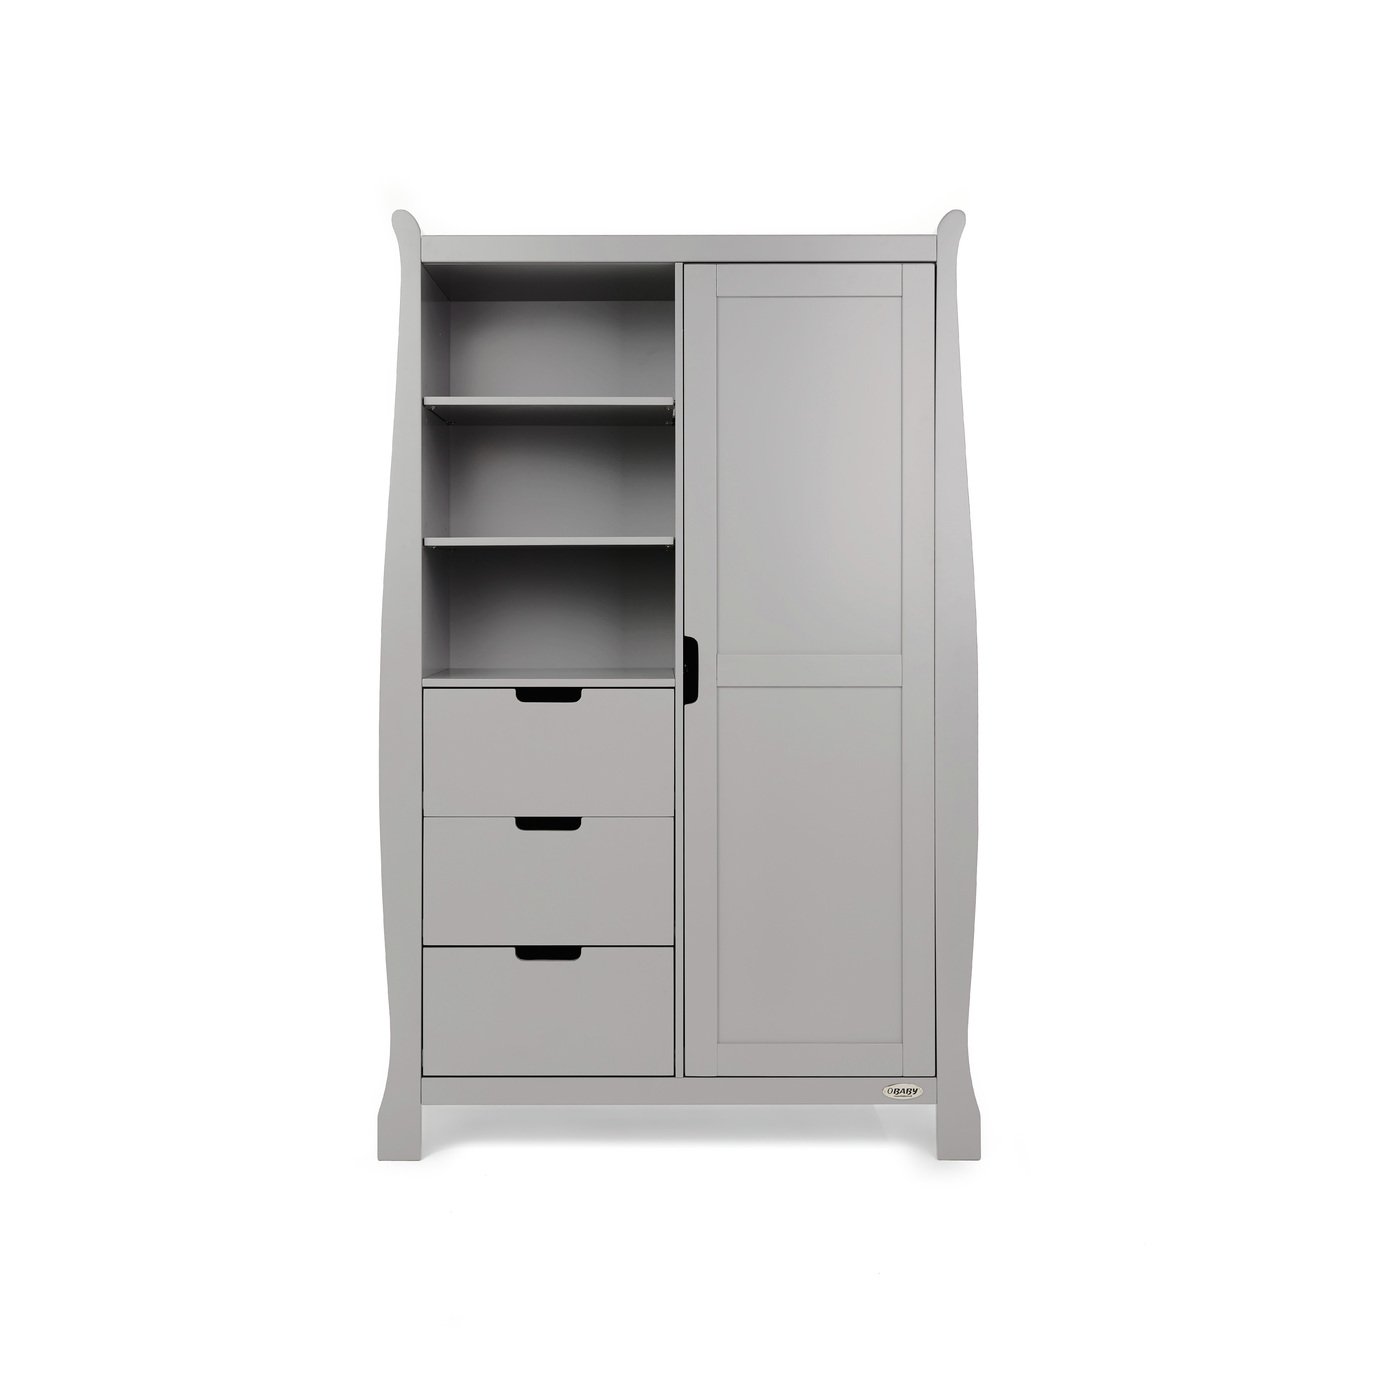 Obaby Stamford Double Wardrobe Review